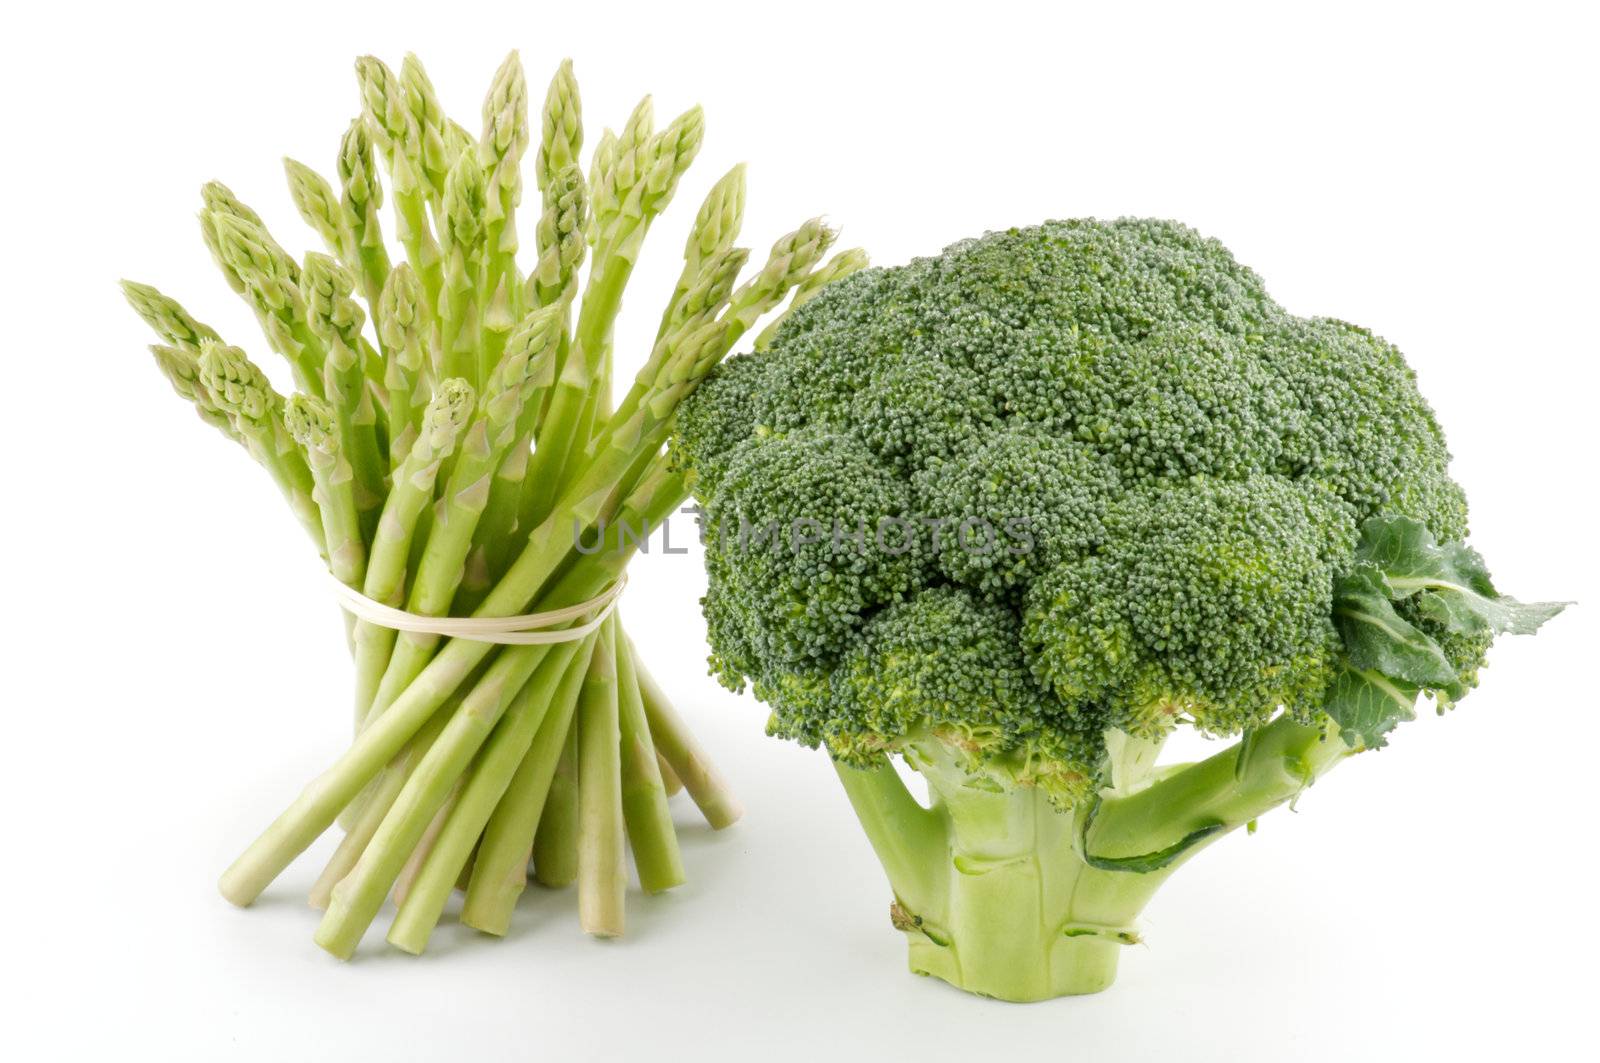 Asparagus sprouts and broccoli floret isolated on white background